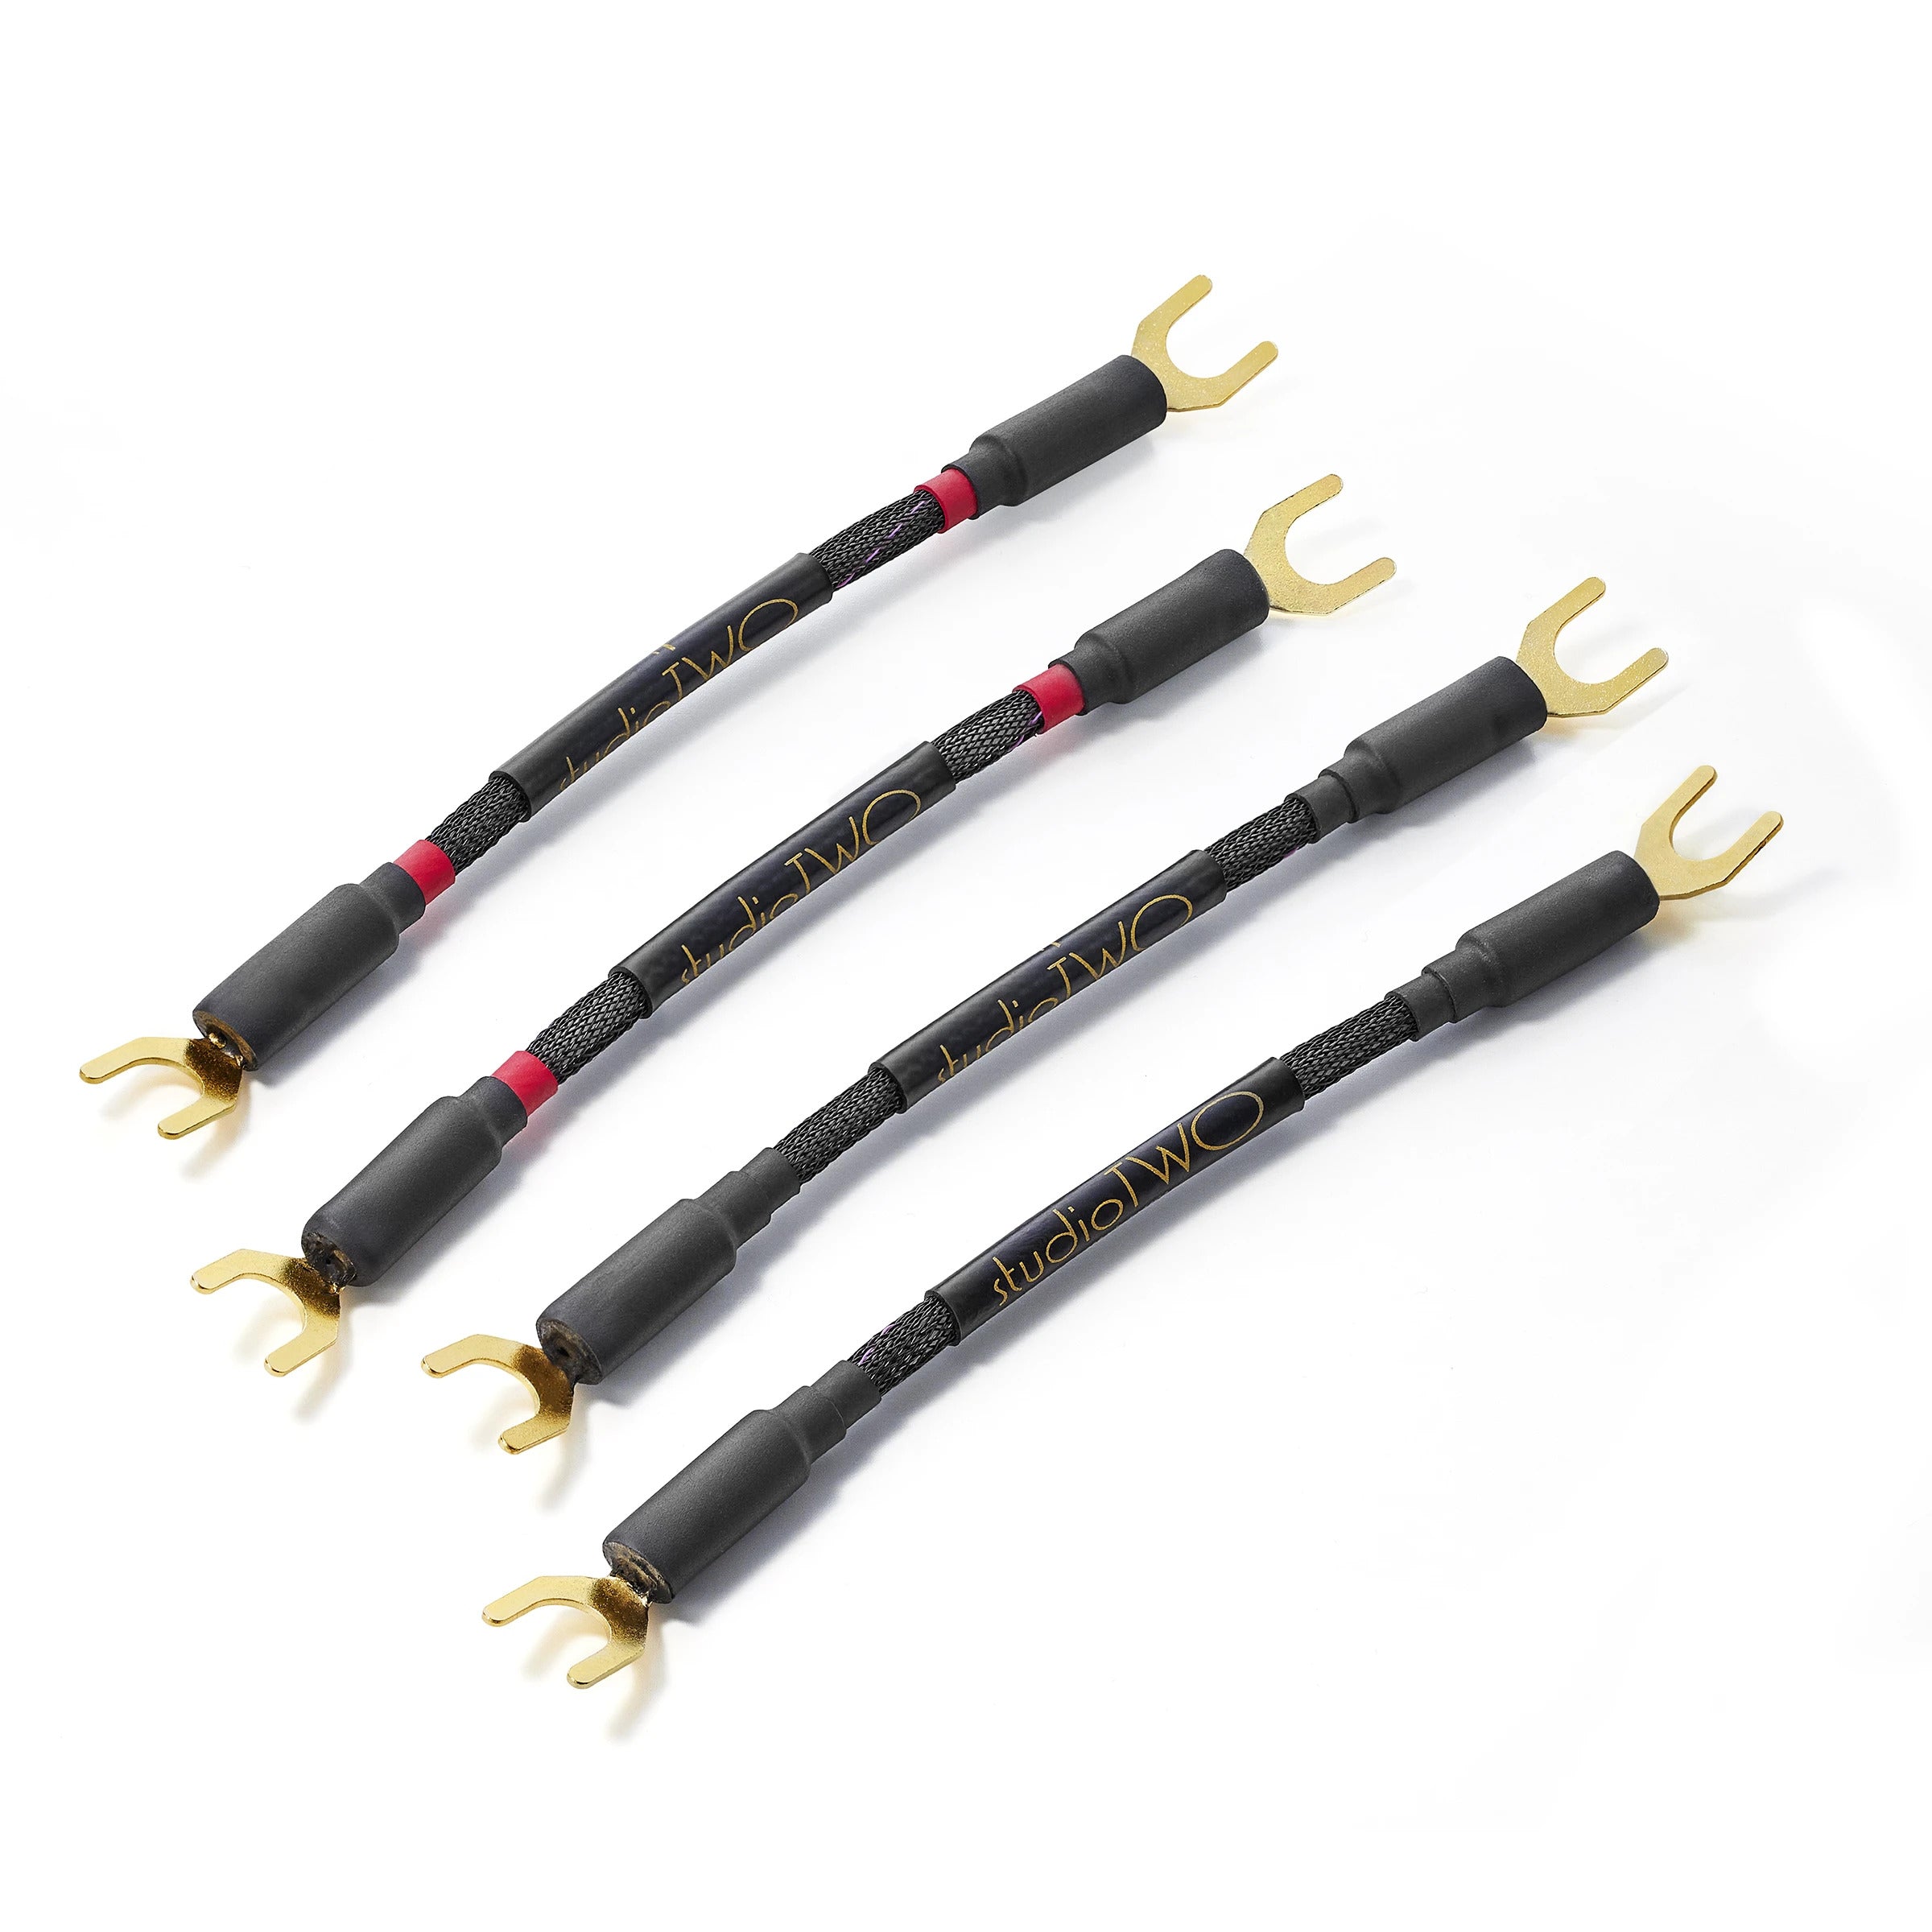 Audience Studio TWO Bi-wired Jumper Cables (set of 4)